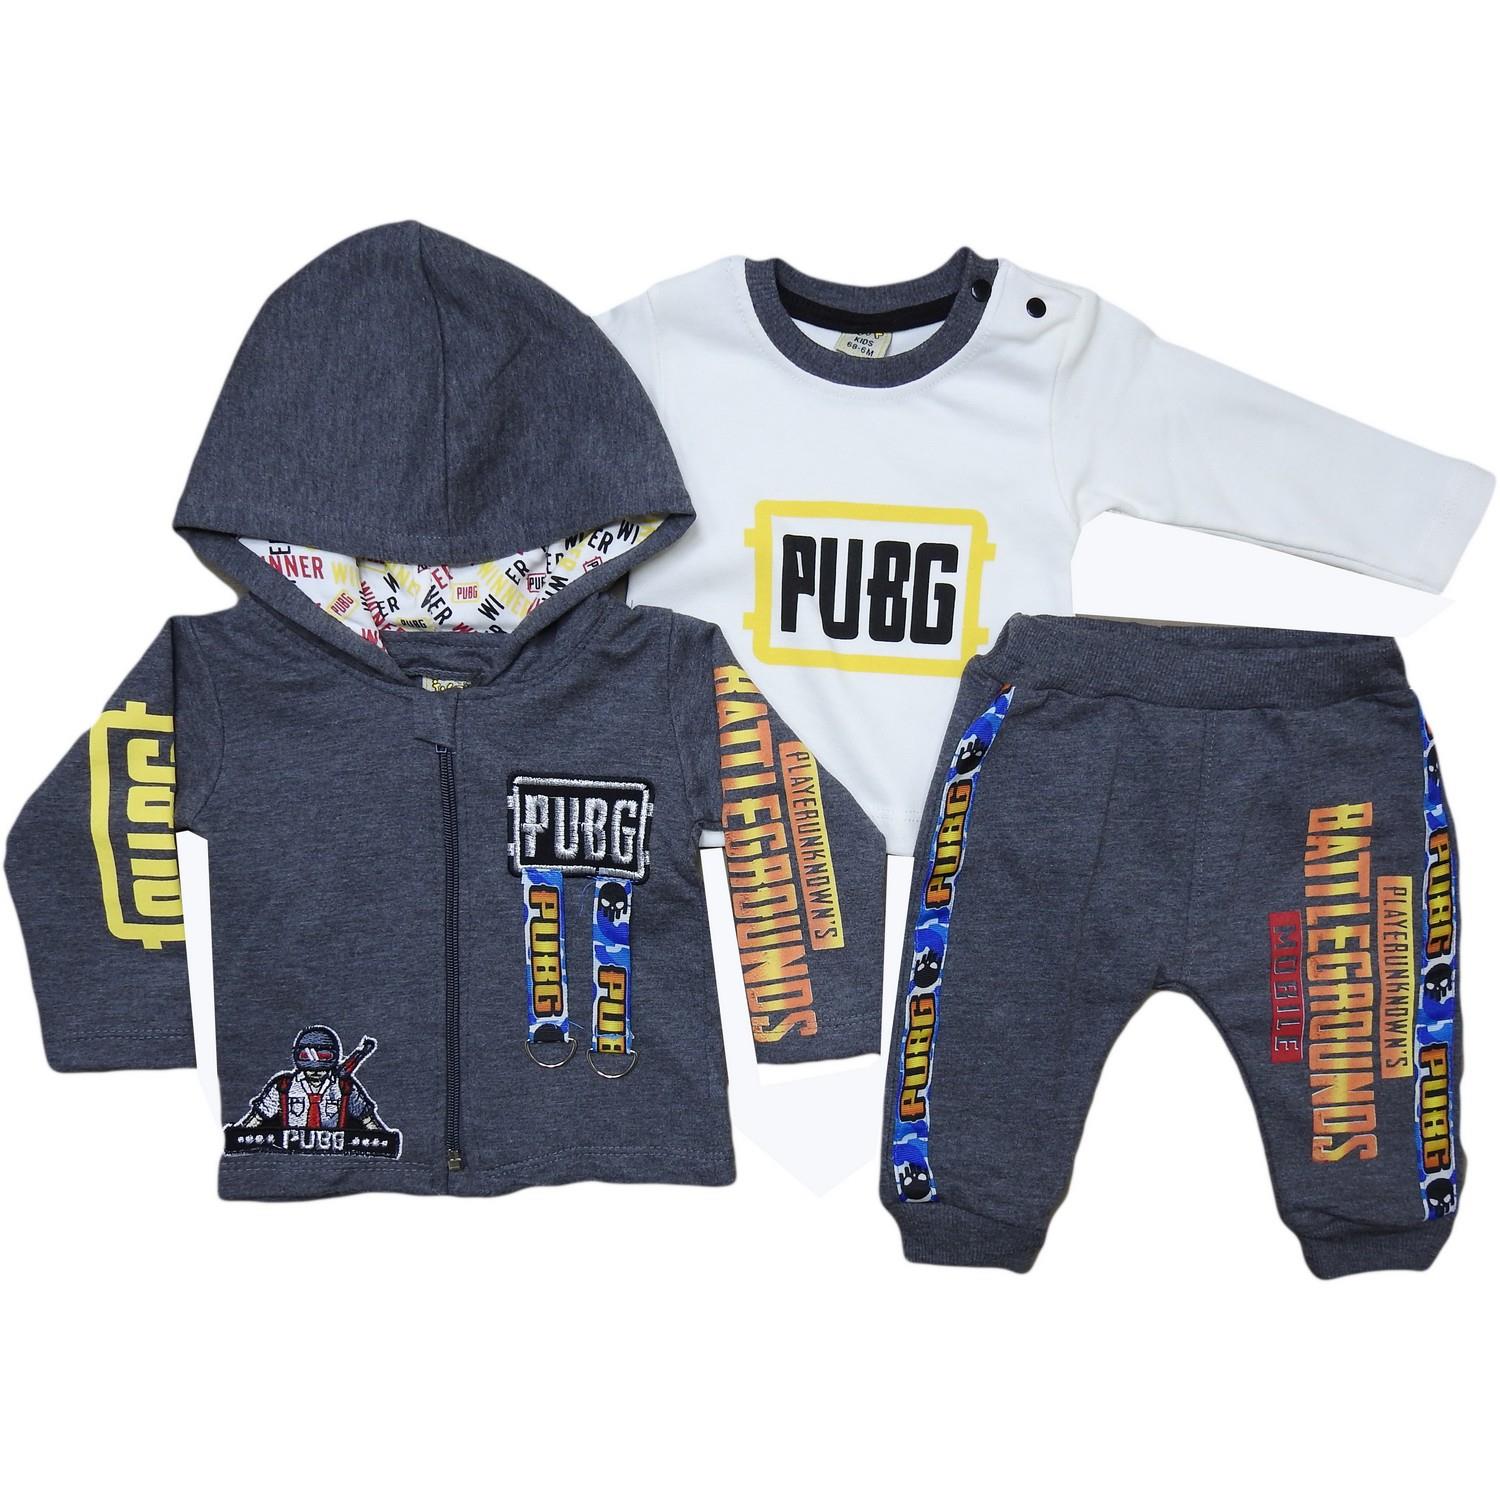 J 3 Triple Bebe Suit With Cardigan Pubg Printed For 6 12 18 24 Months Age